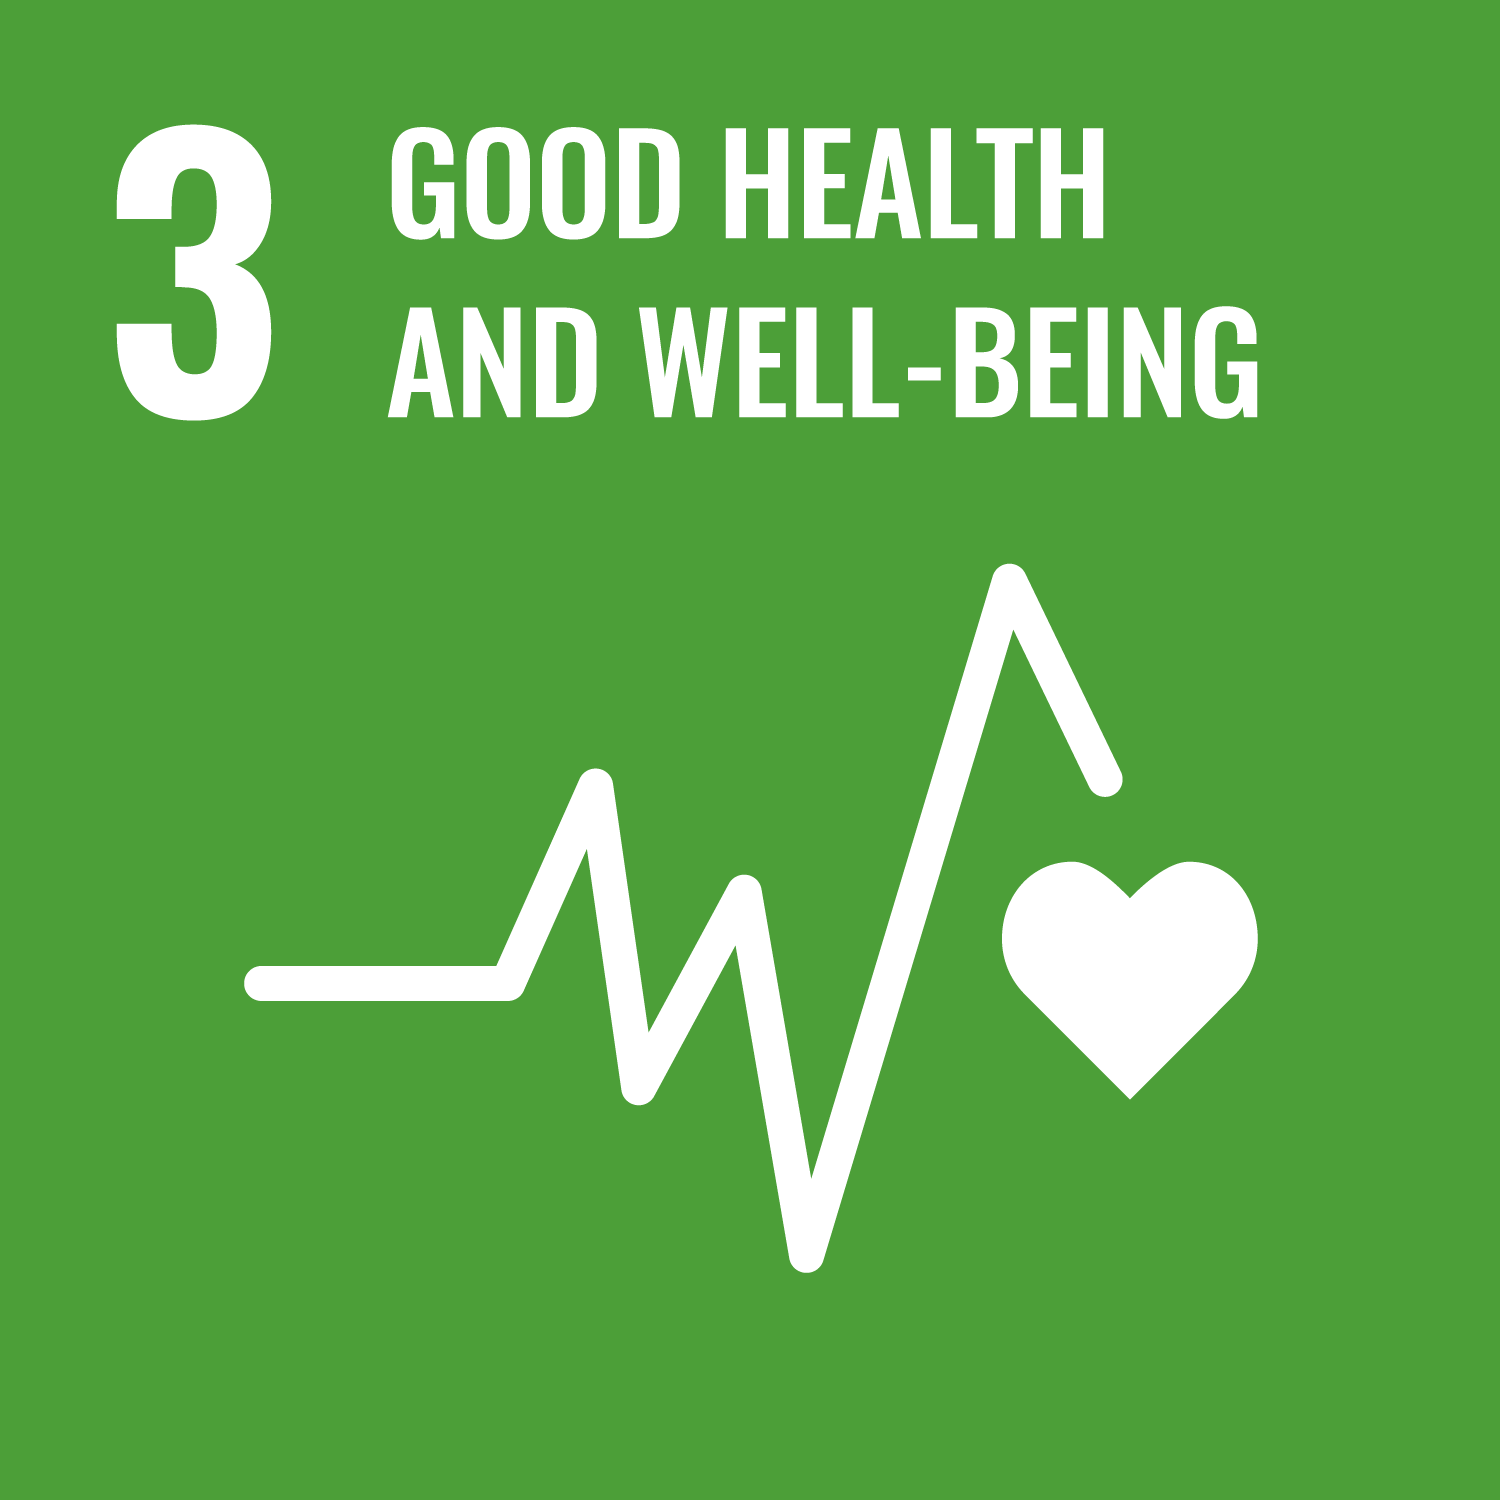 SDG 3: Ensure healthy lives and promote wellfare for all at all ages